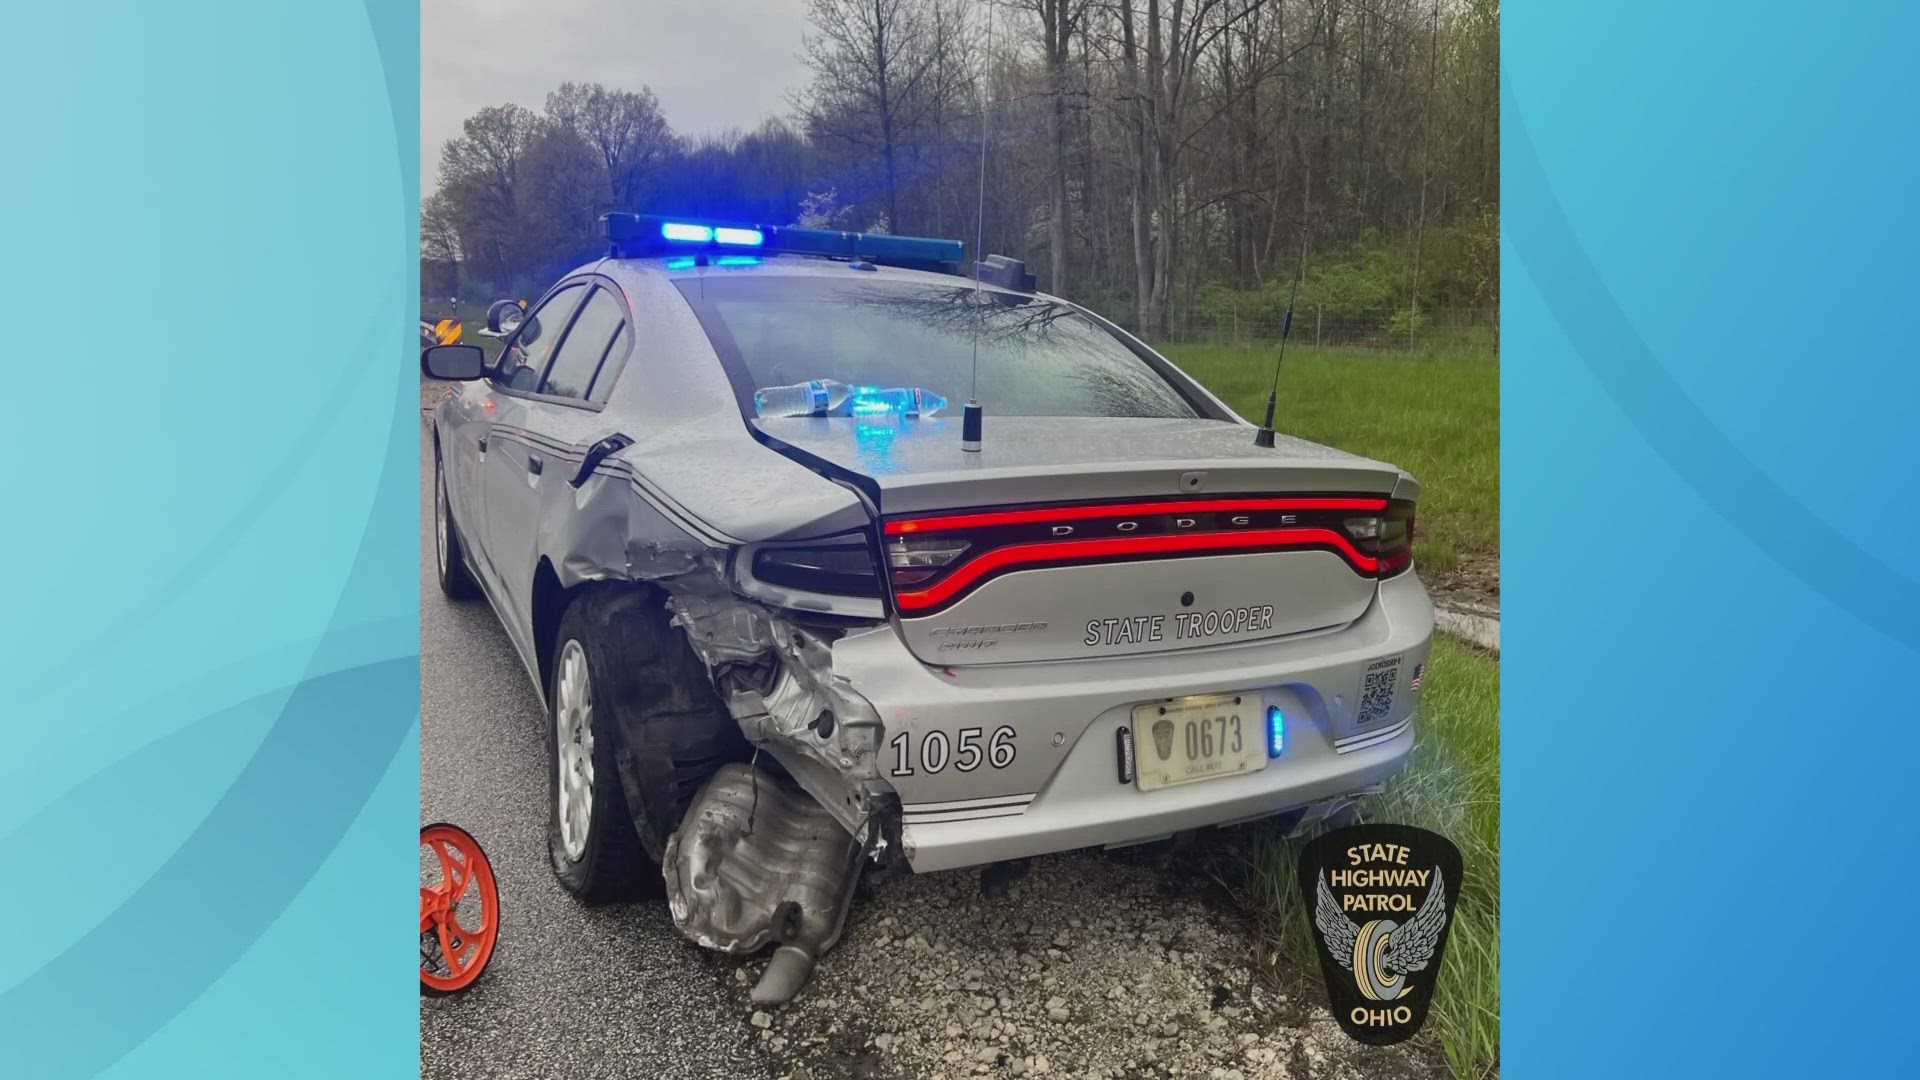 Trooper Alfonso Sierra suffered minor injuries after his cruiser was hit on the Turnpike. The driver who struck him is believed to have suffered a medical episode.